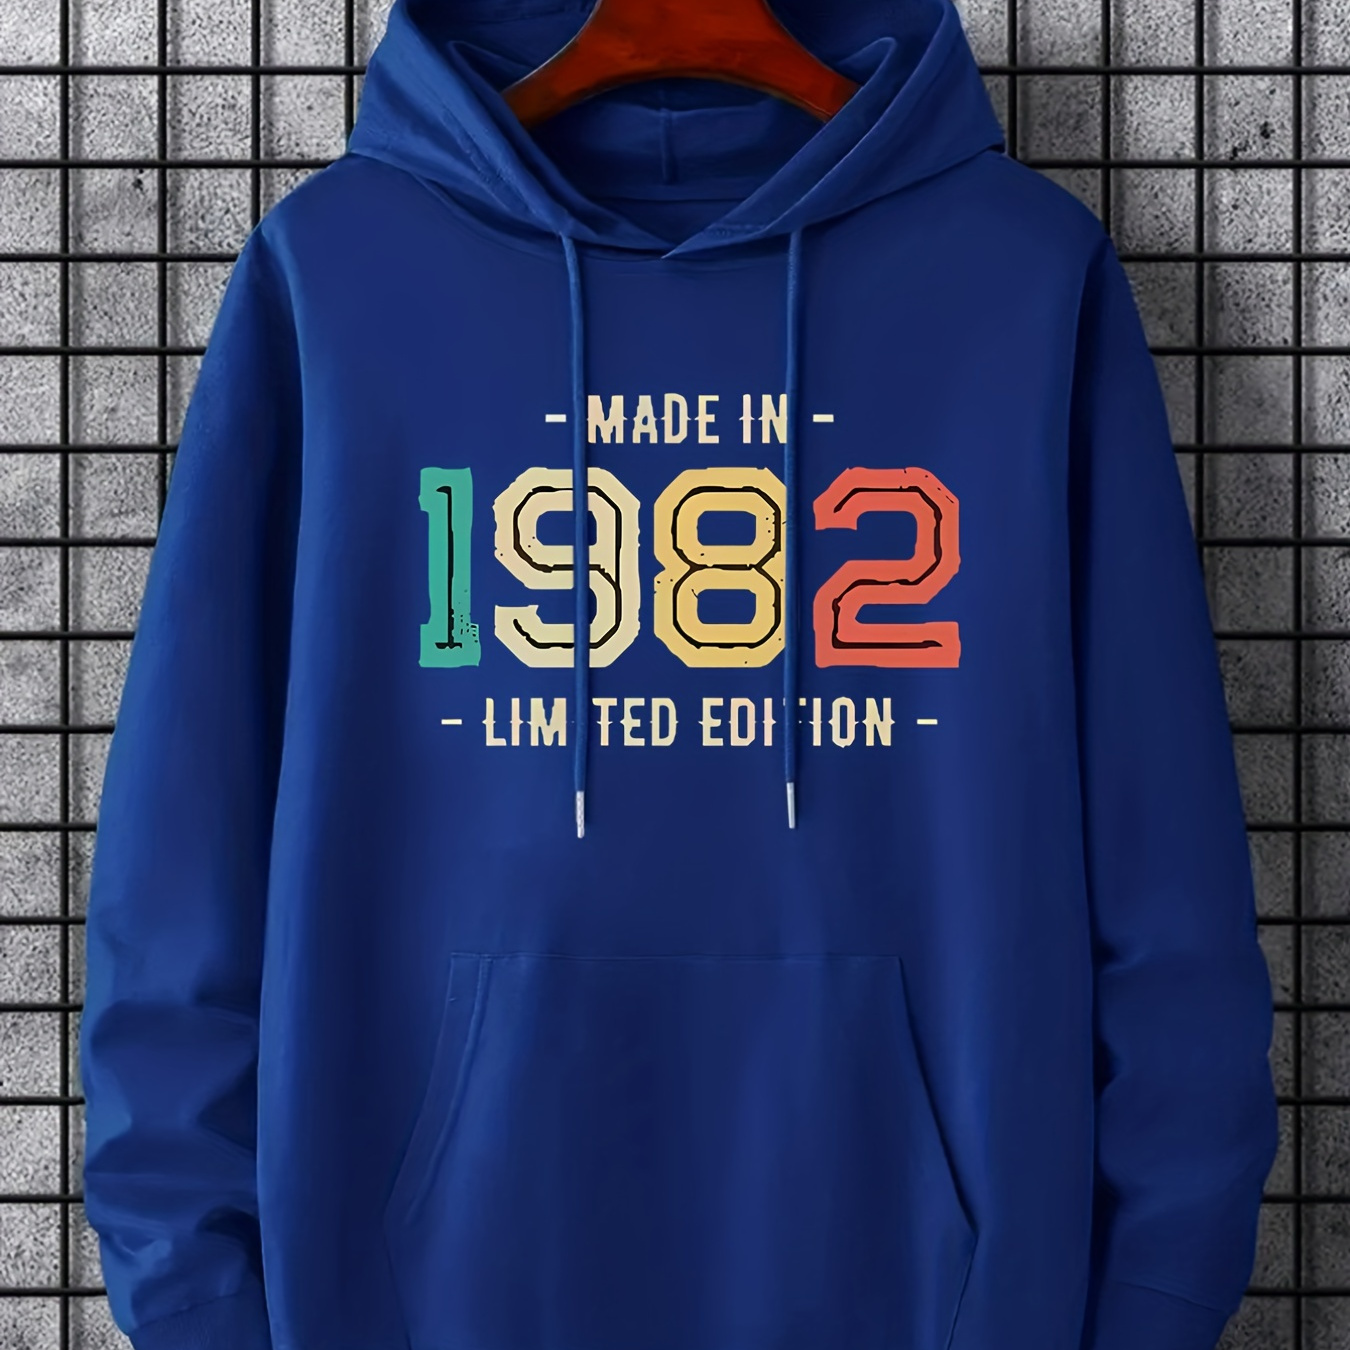 

Plus Size Men's Hooded Sweatshirt "1982" Print Hoodies Fashion Casual Oversized Tops For Spring/autumn, Men's Clothing